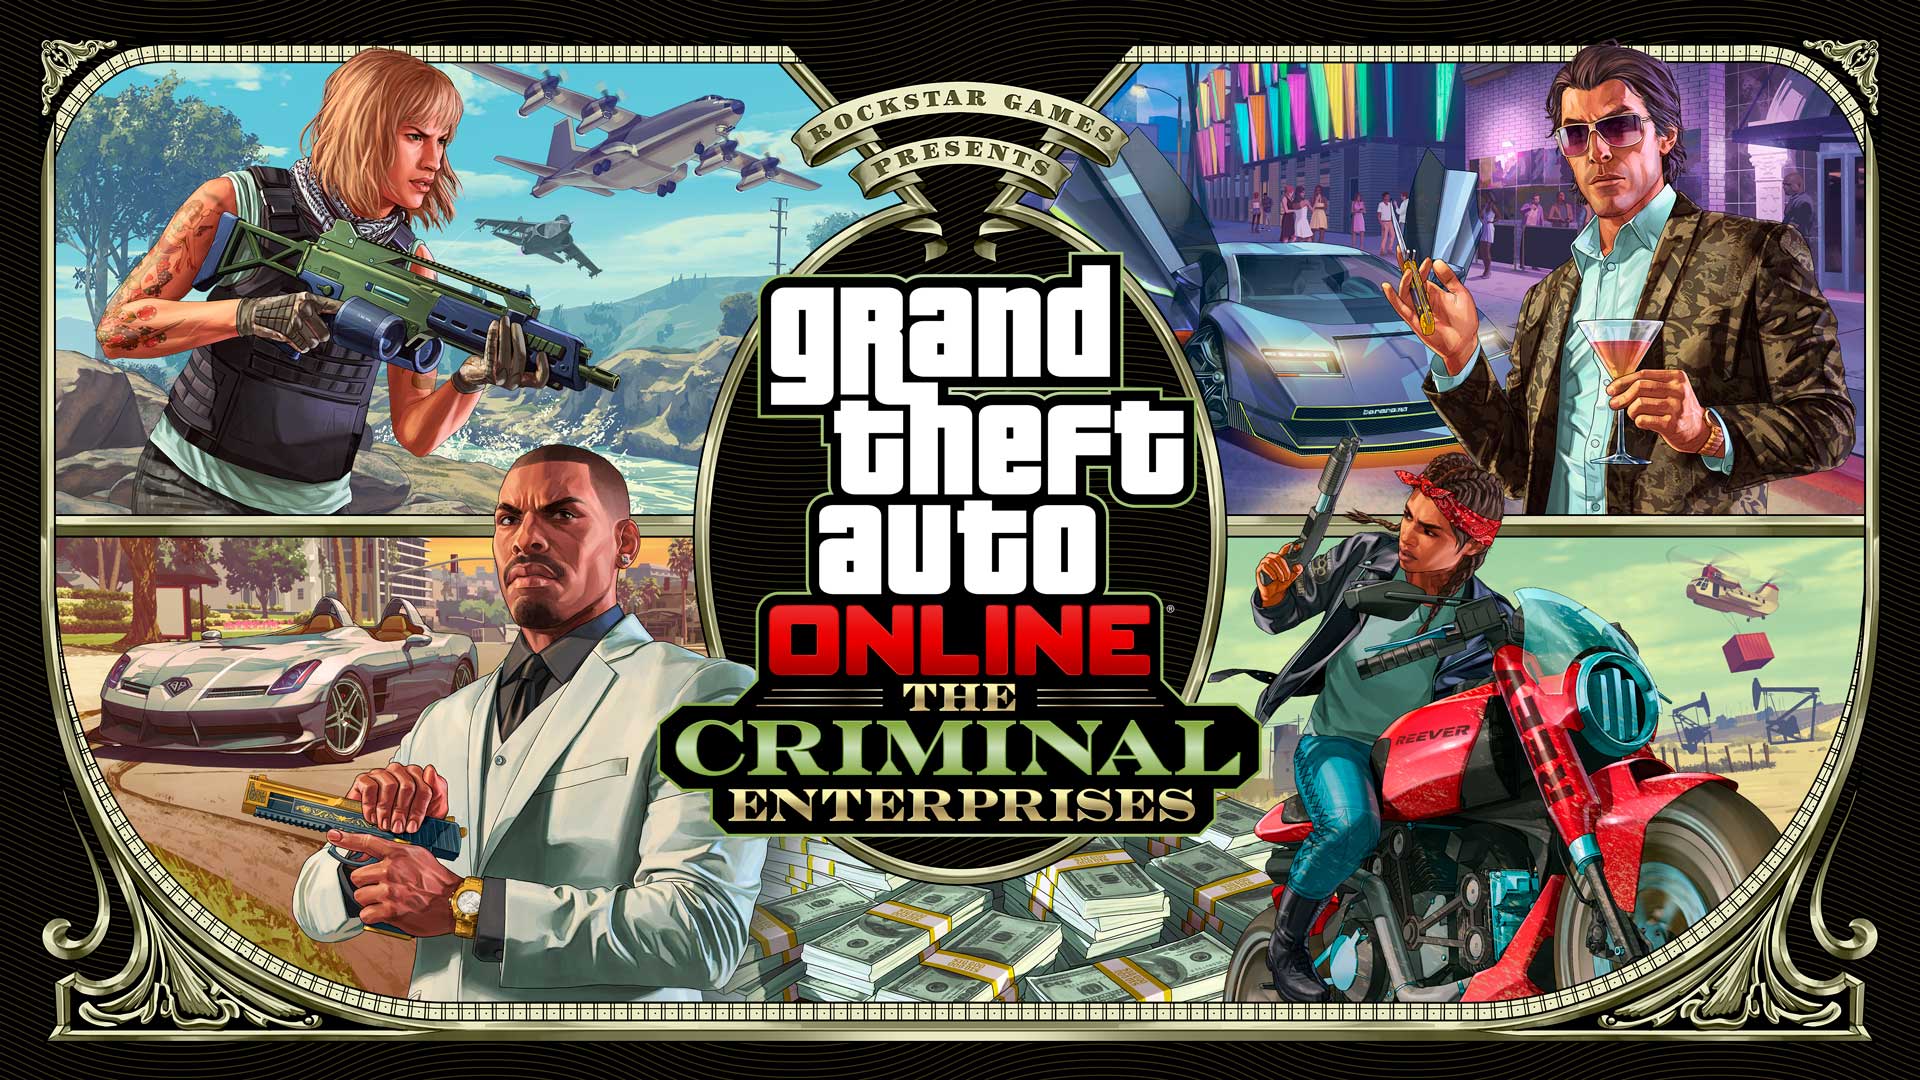 Vend om afsked Demontere GTA V Update 1.61 Patch Notes for PS4, PS5, Xbox One, Xbox Series X|S and PC  - RockstarINTEL